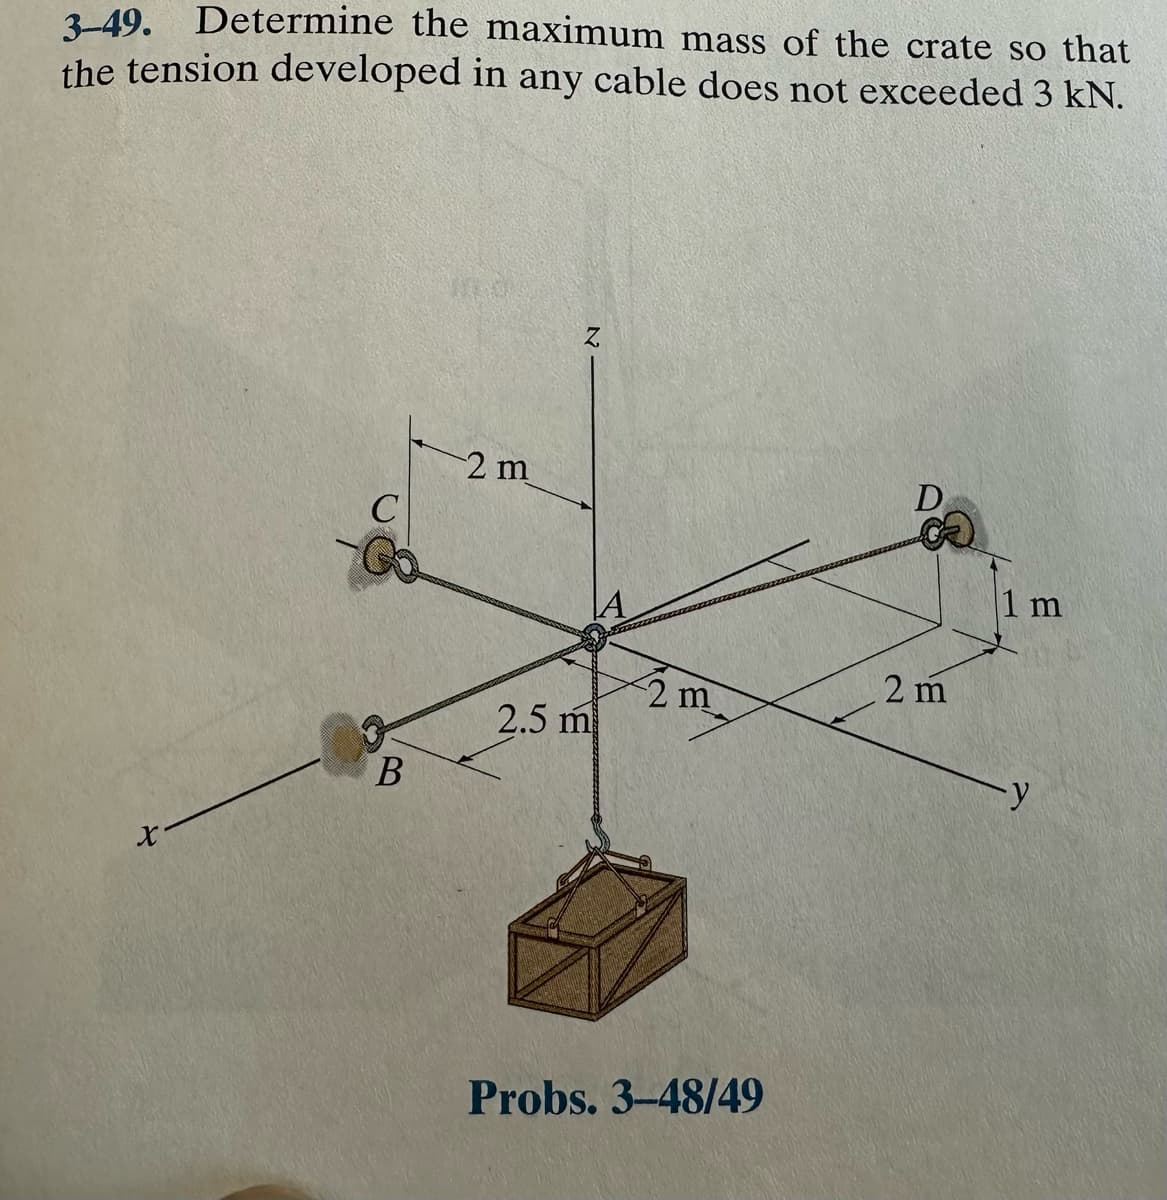 3-49. Determine the maximum mass of the crate so that
the tension developed in any cable does not exceeded 3 kN.
X
C
B
2 m
Z
2.5 m
2 m
Probs. 3-48/49
D
2 m
1 m
y